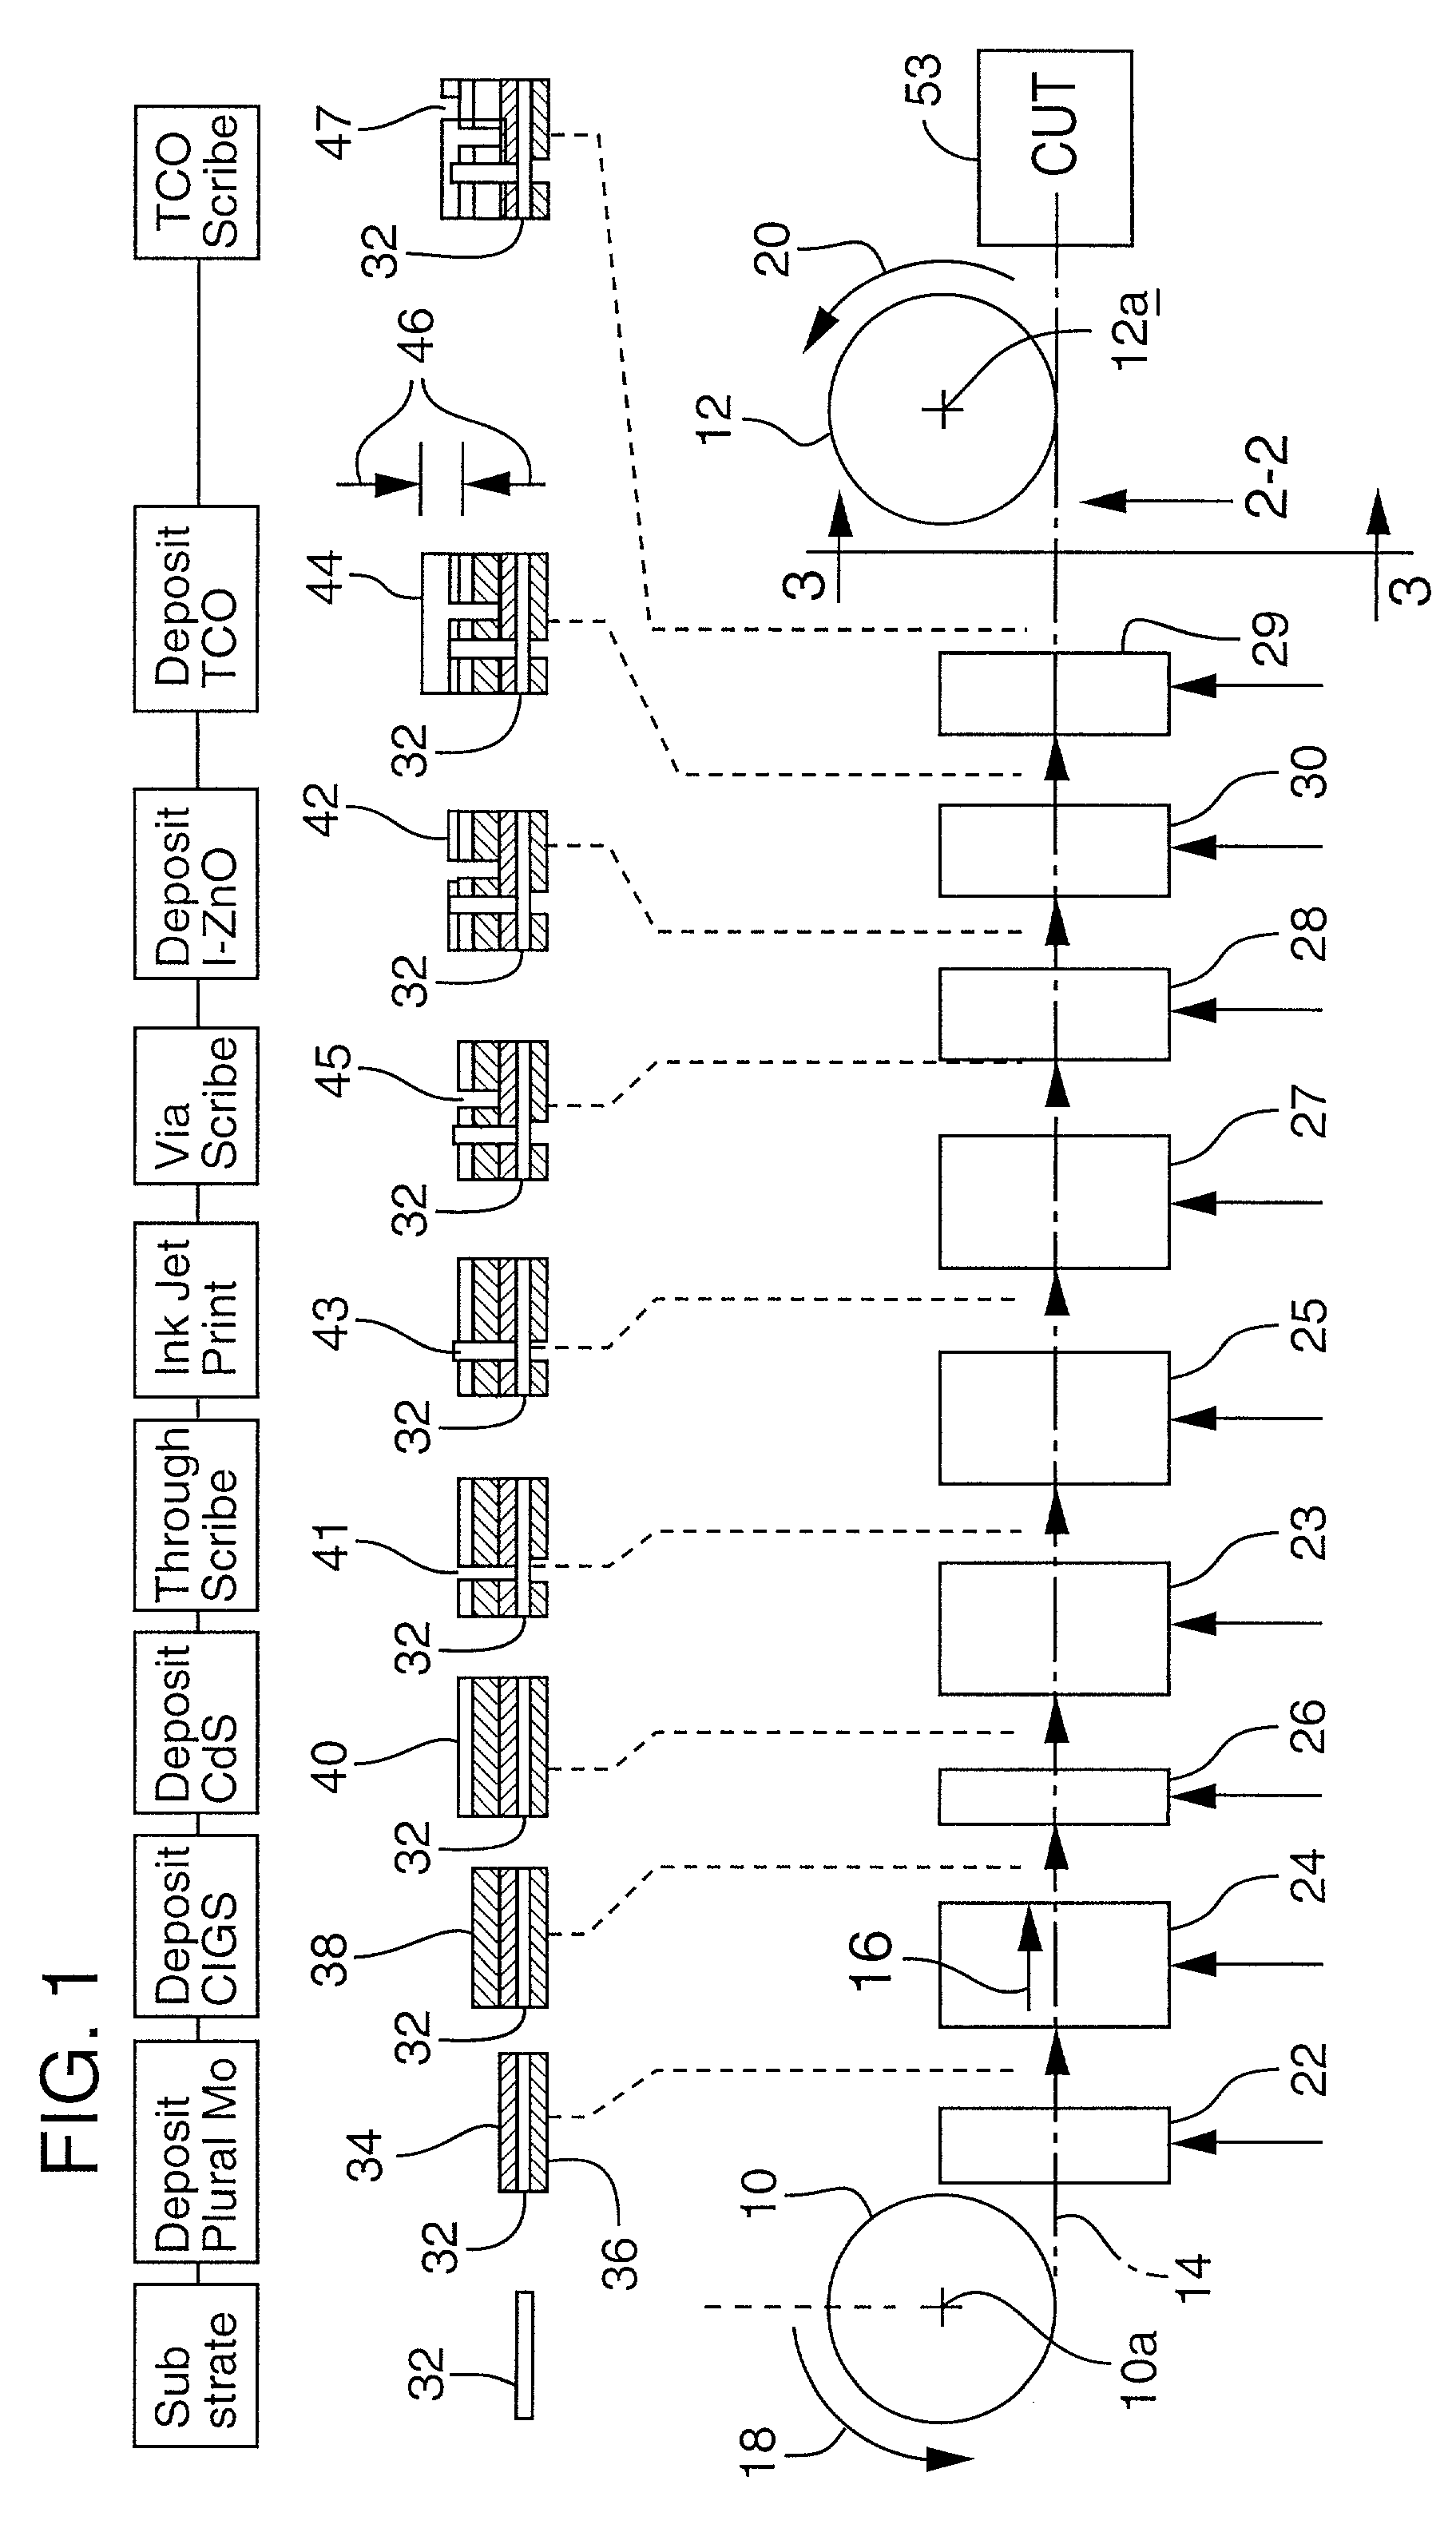 Nozzle-based, vapor-phase, plume delivery structure for use in production of thin-film deposition layer